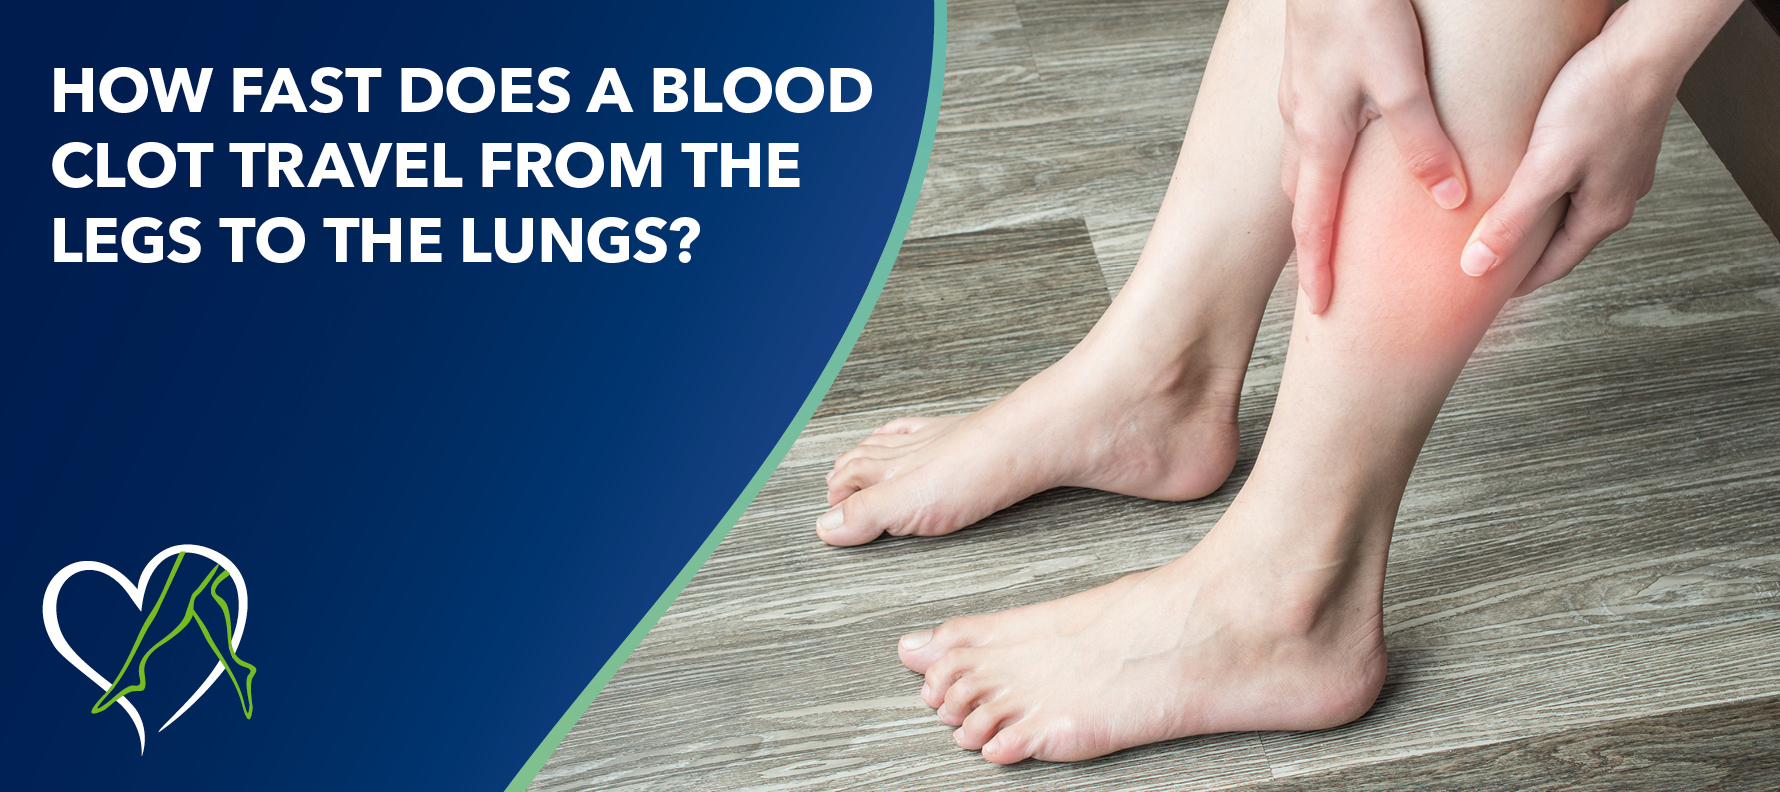 How Fast Does a Blood Clot Travel from the Legs to the Lungs?